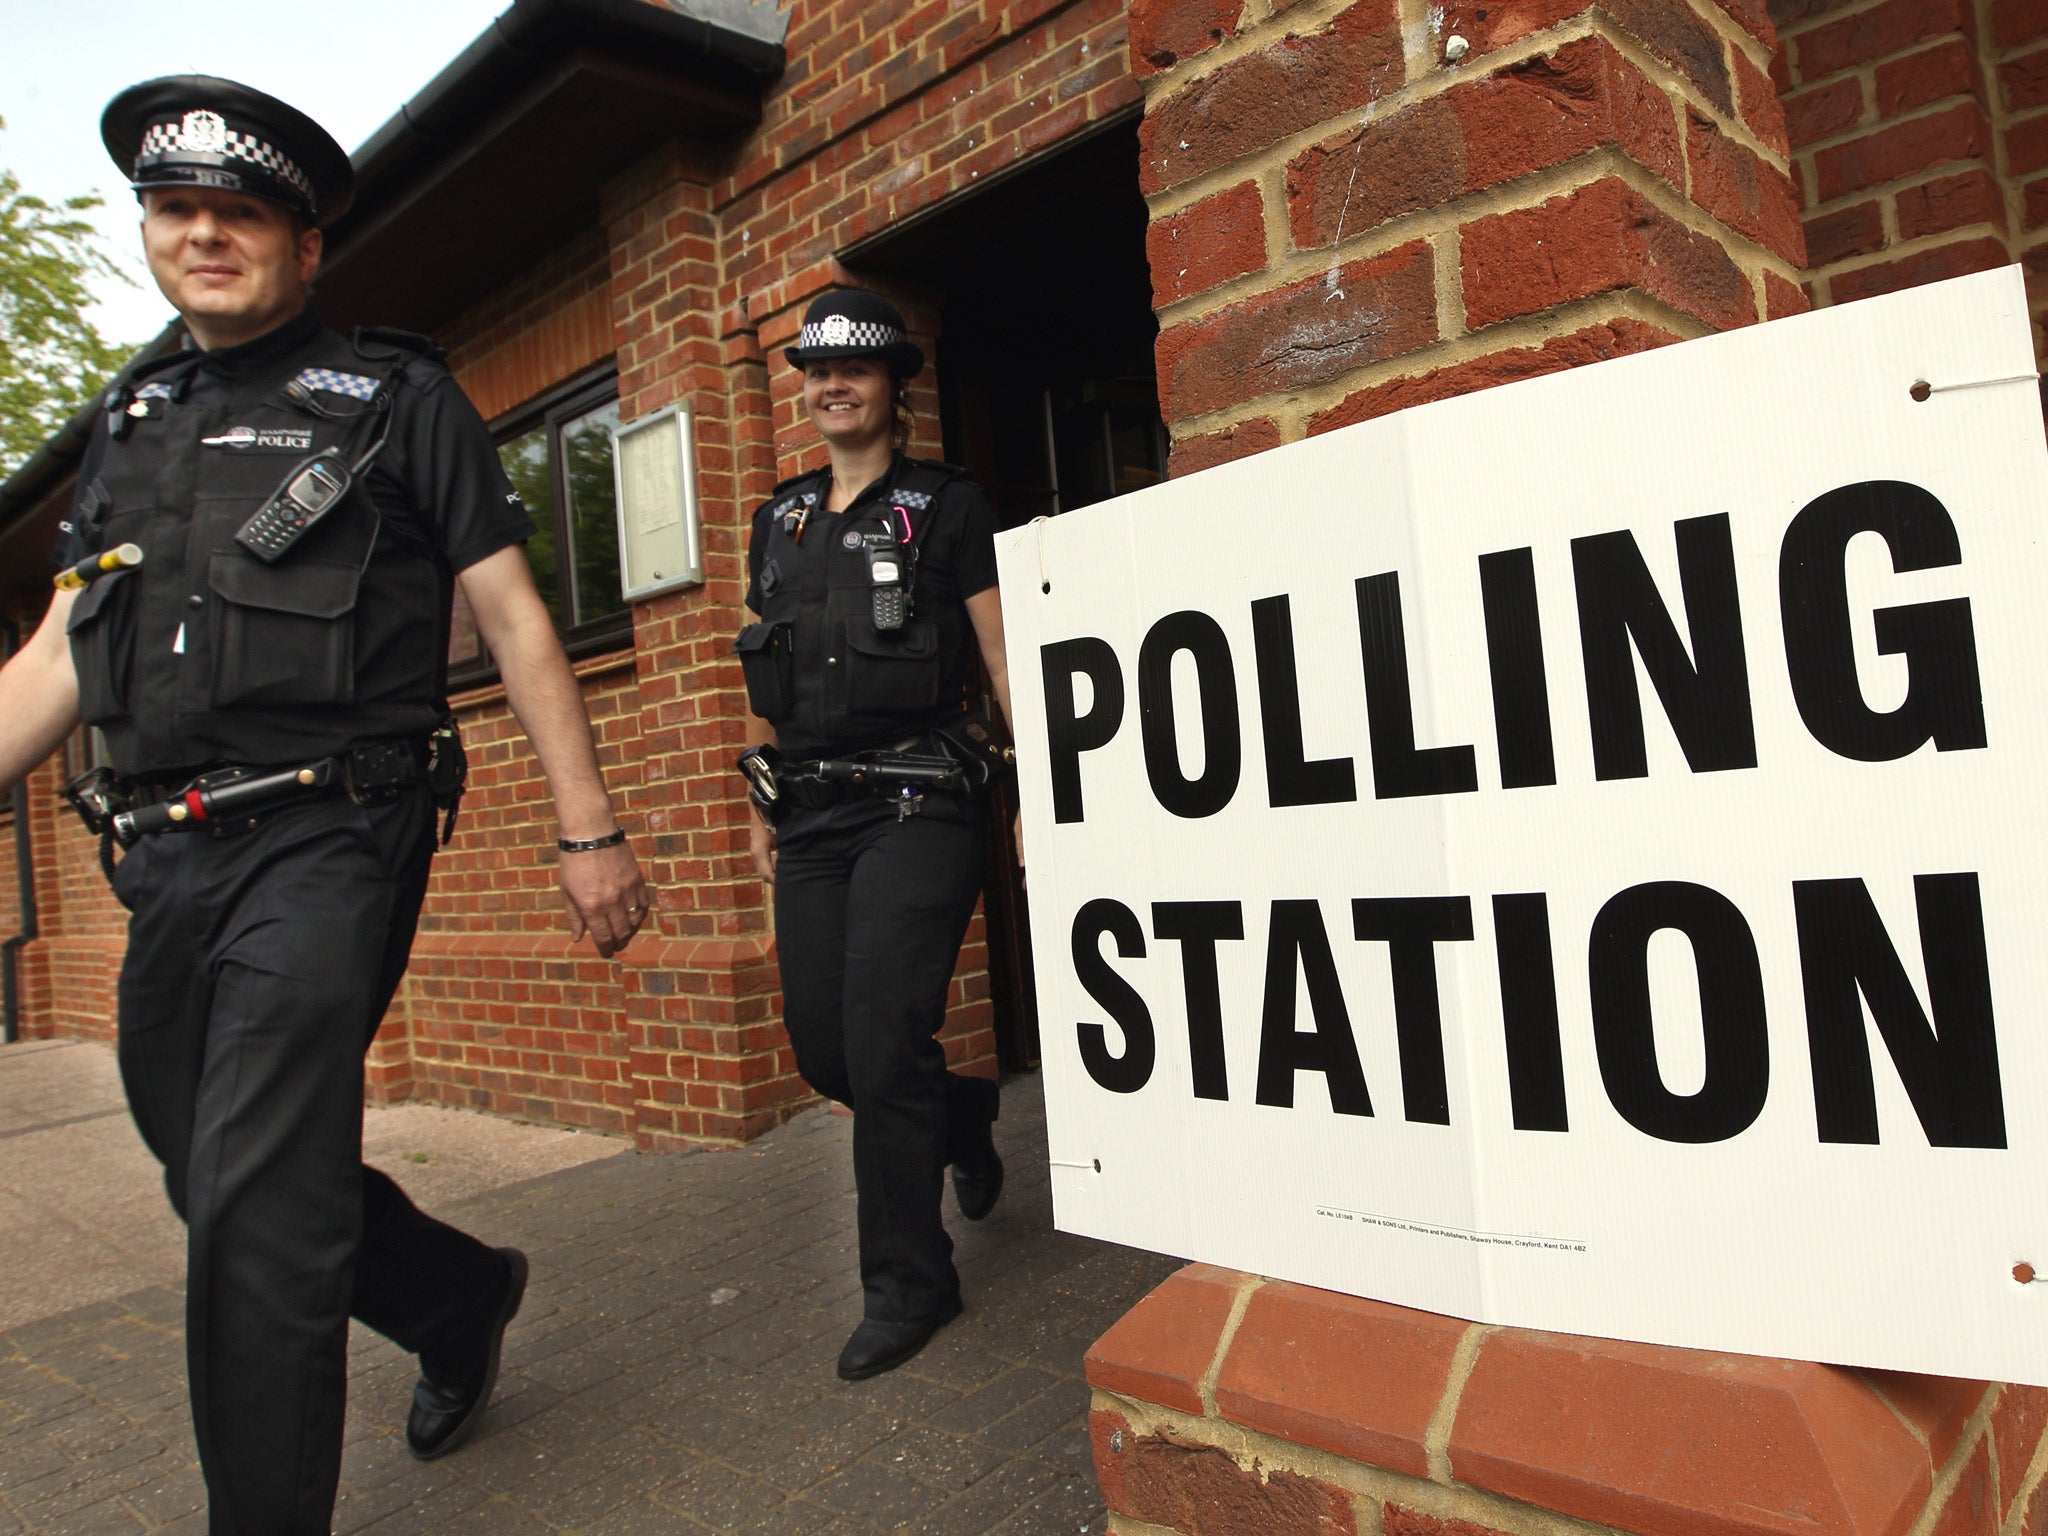 Police officers outside a polling station during the 2011 Alternative Vote national referendum